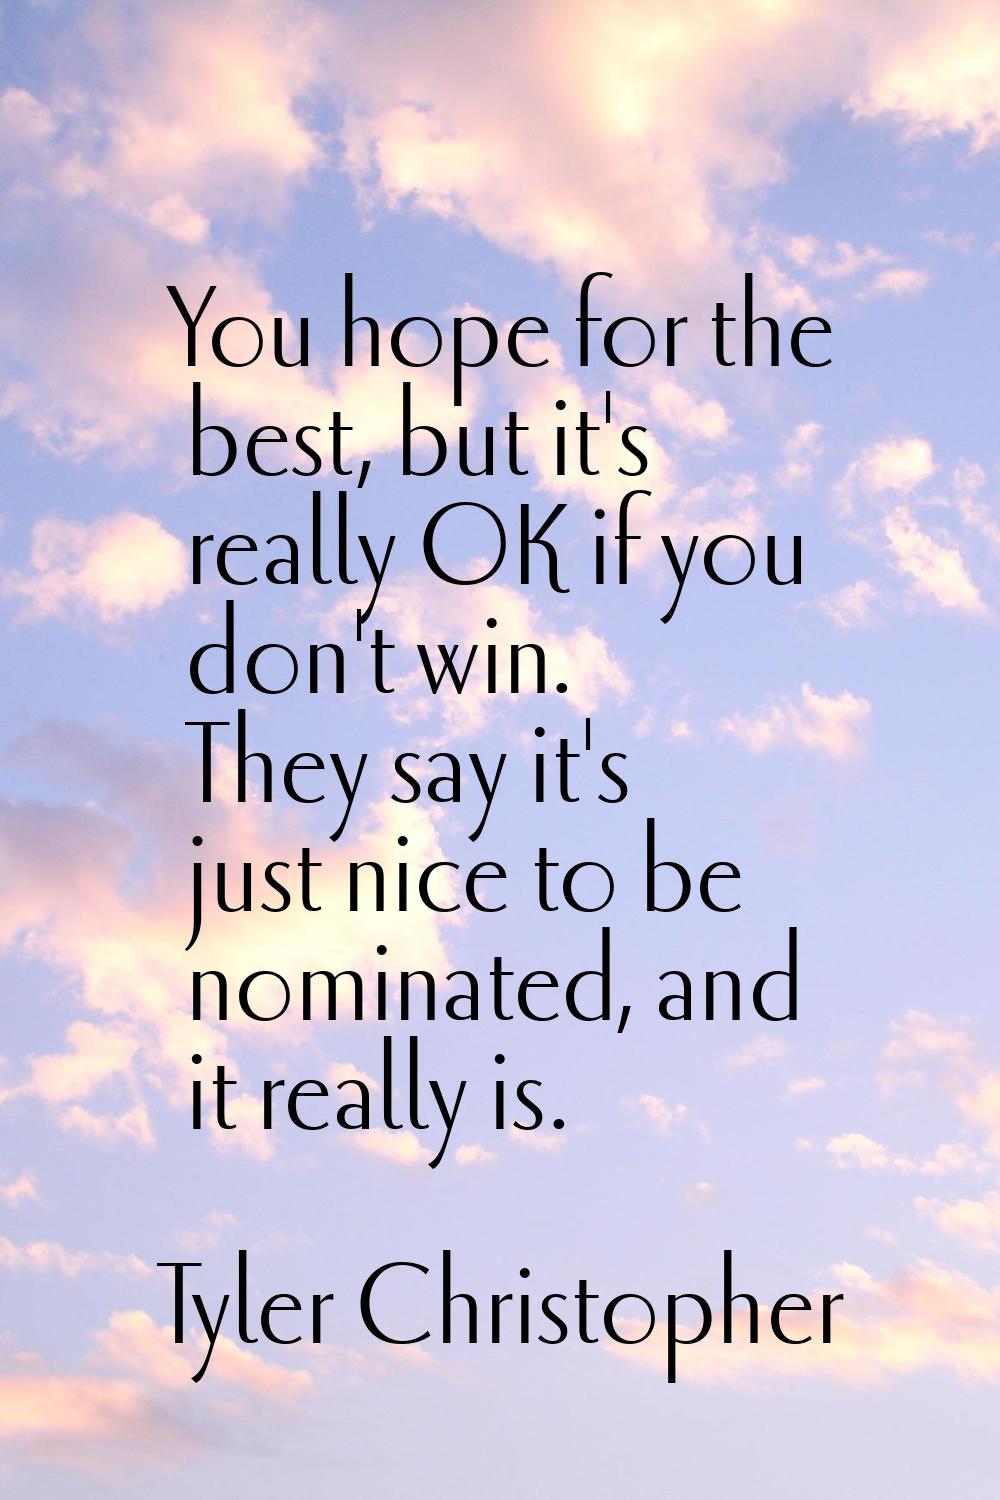 You hope for the best, but it's really OK if you don't win. They say it's just nice to be nominated